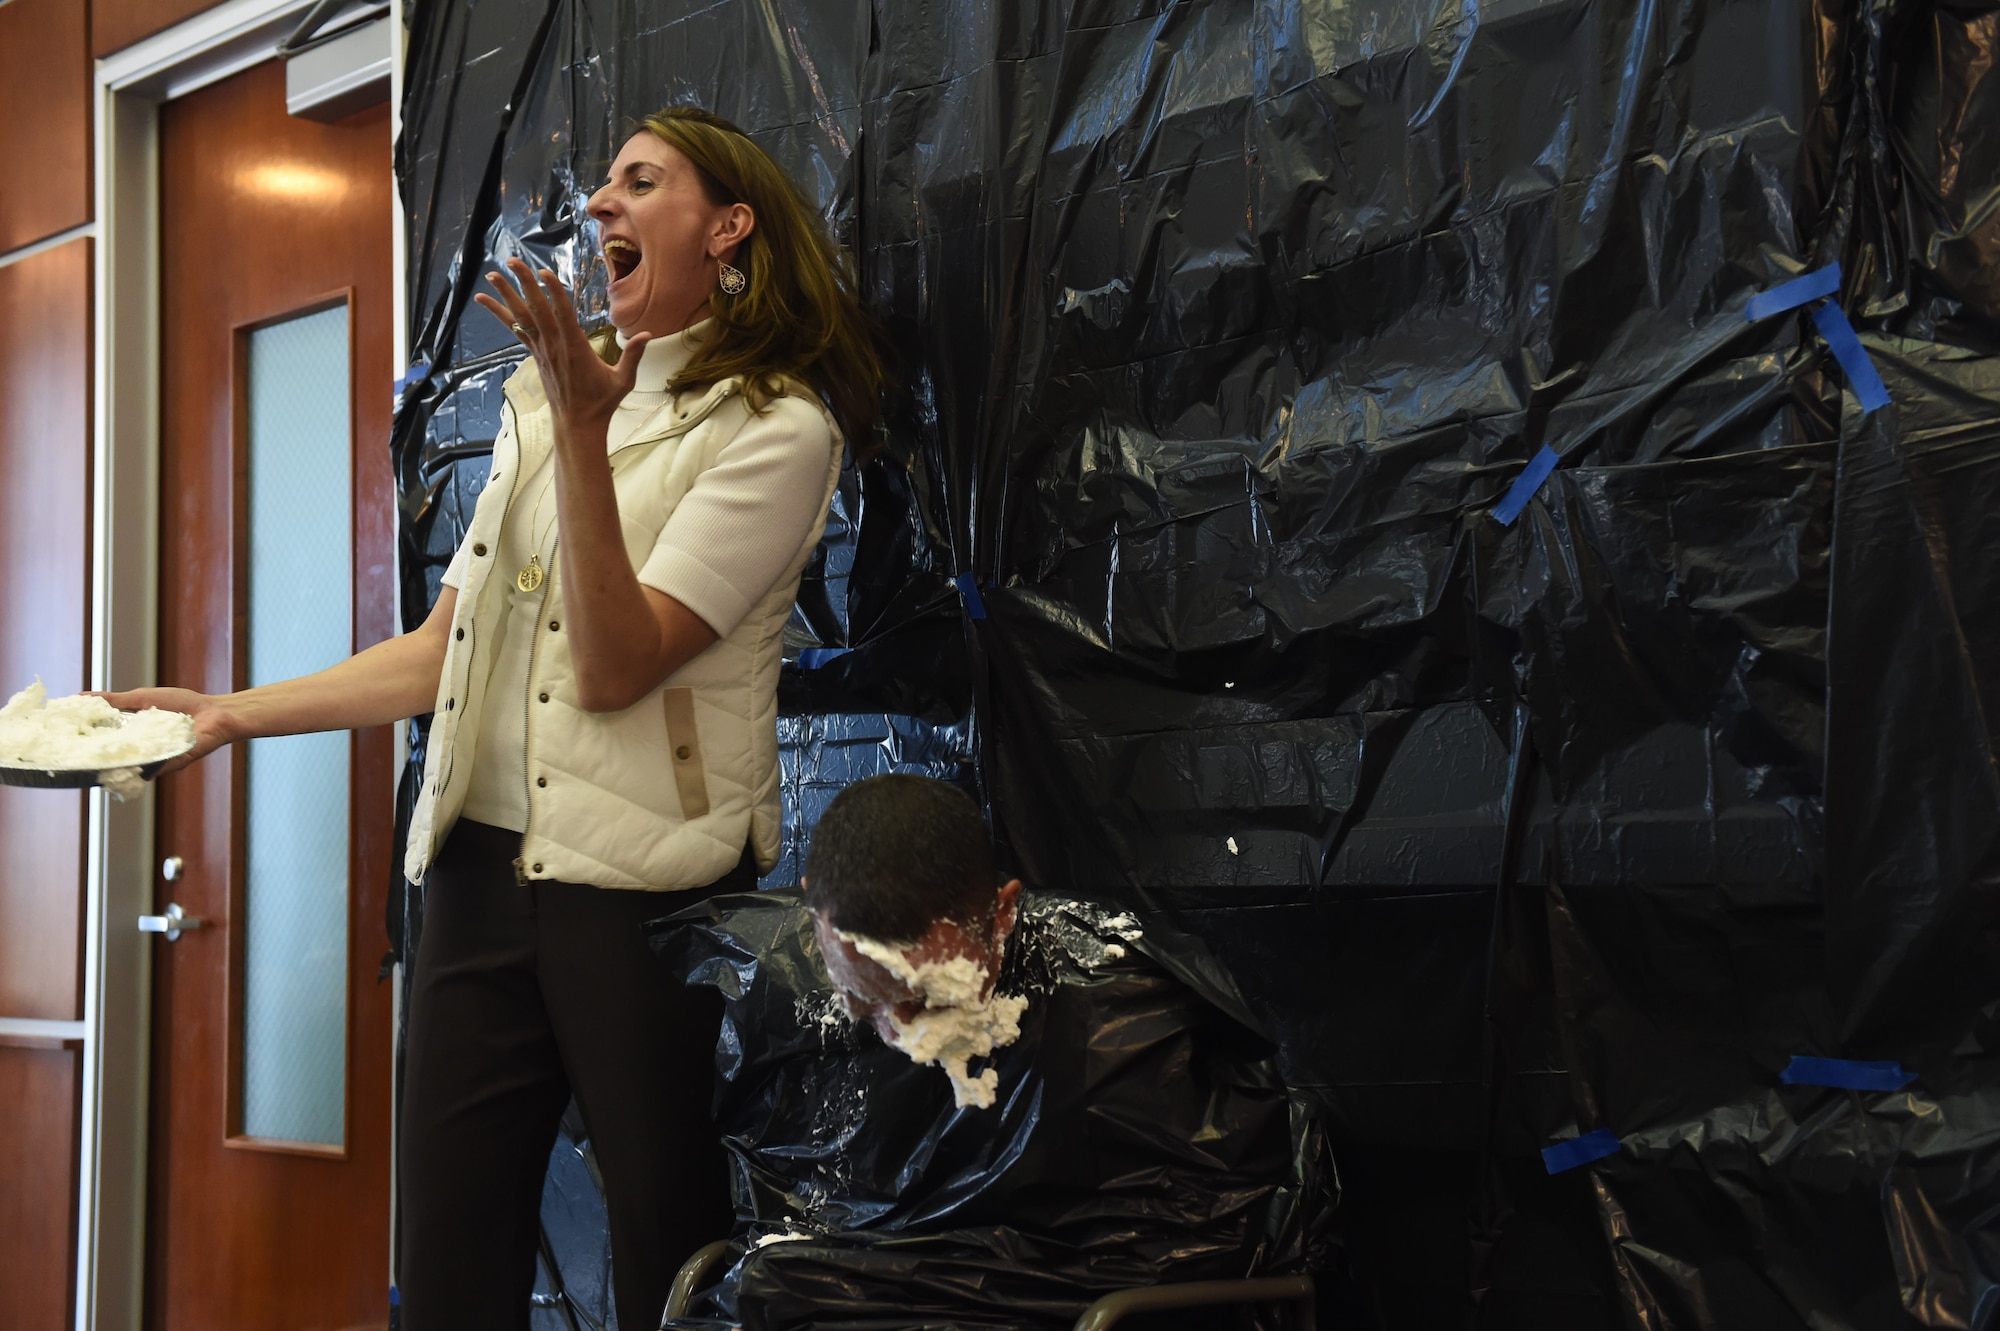 Chief Master Sgt. Brian Kruzelnick, 460th Space Wing command chief, takes a pie in the face from Christina Grooms, 460th Space Wing community support coordinator, as a fundraiser for the Combined Federal Campaign Nov. 20, 2015, on Buckley Air Force Base, Colo. Buckley AFB held Wingman Day in order to recognize the men and women who continue the mission of the 460th Space Wing each and every day. (U.S. Air Force photo by Airman 1st Class Luke W. Nowakowski/Released)